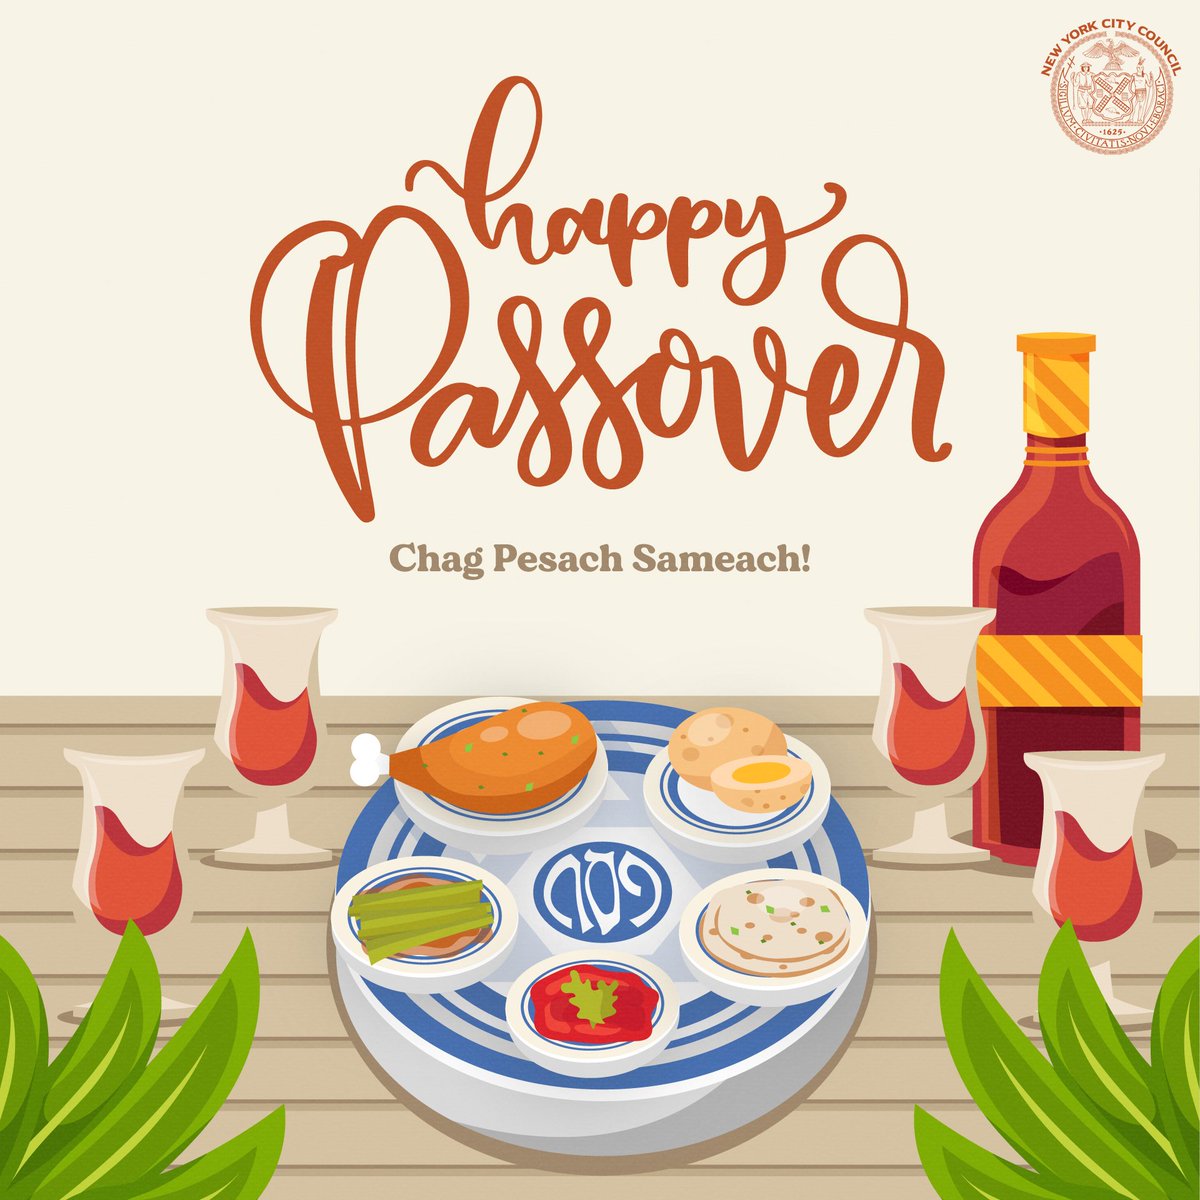 This evening marks the first night of Passover, a joyous holiday that reminds us of the importance of reflecting on history and passing on its lessons to future generations. Wishing a Chag Pesach Kasher V’Sameach to New York City’s Jewish community!